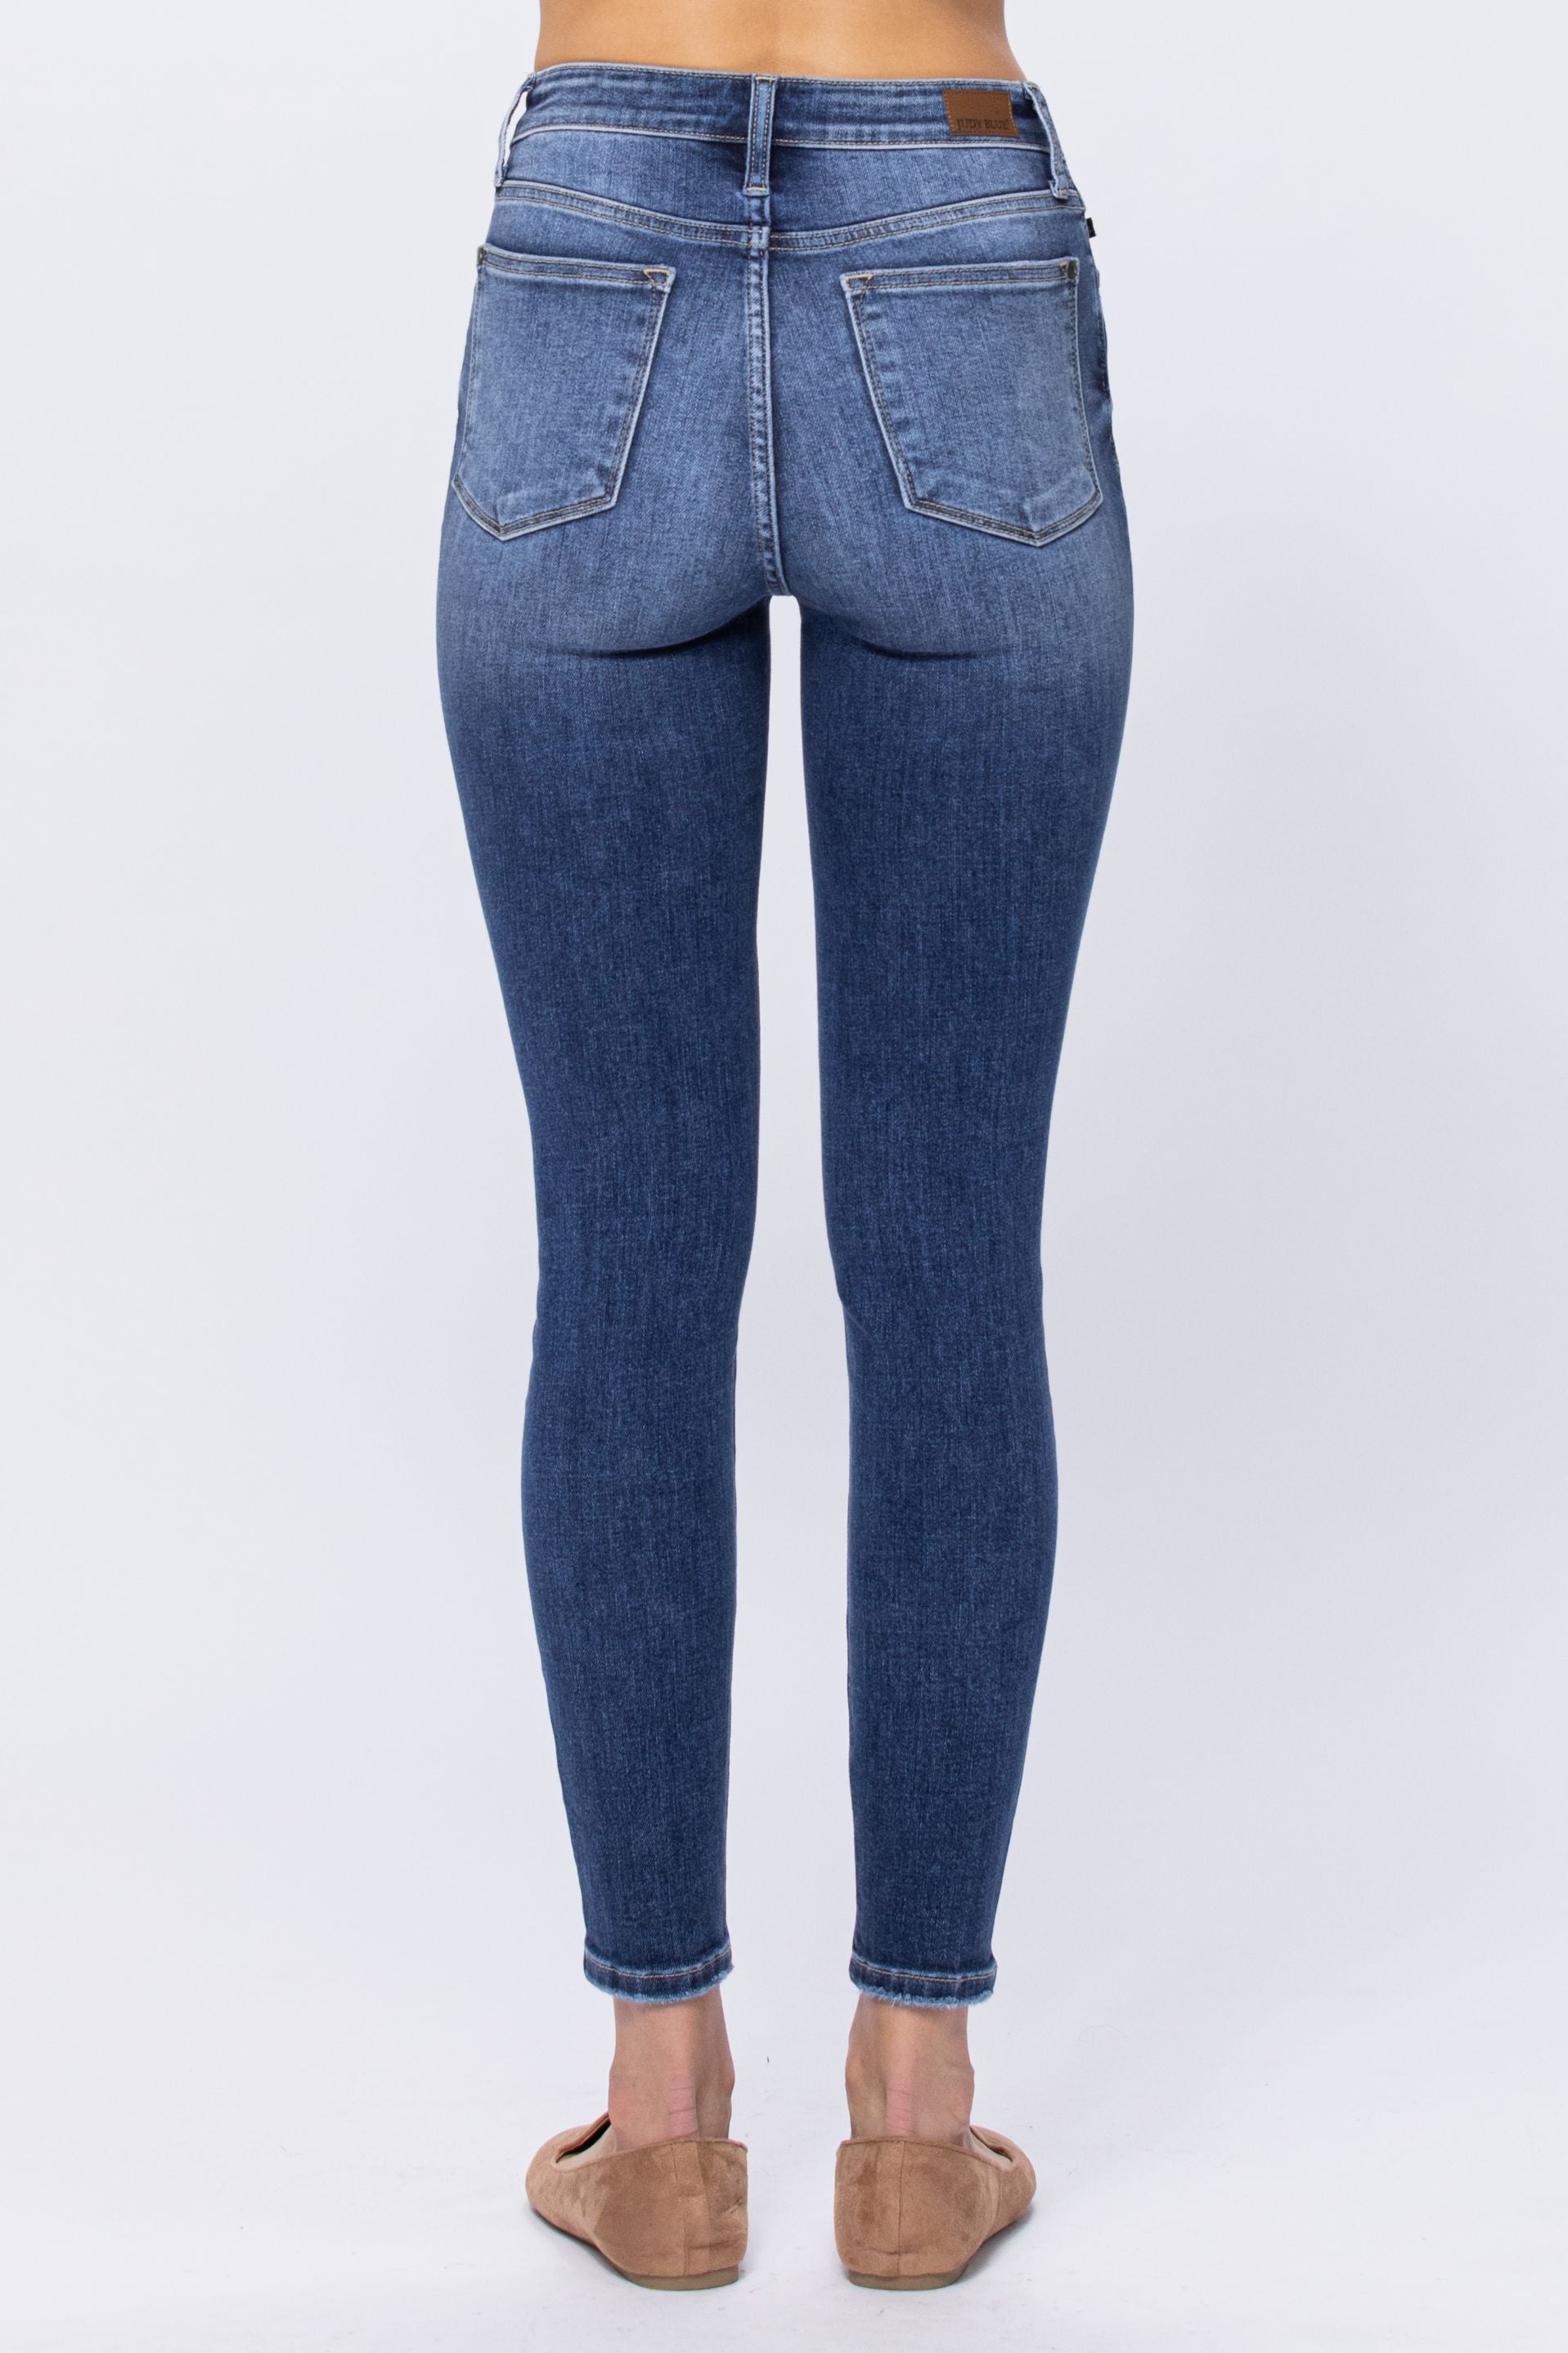 JUDY BLUE HI RISE BUTTON FLY SKINNY